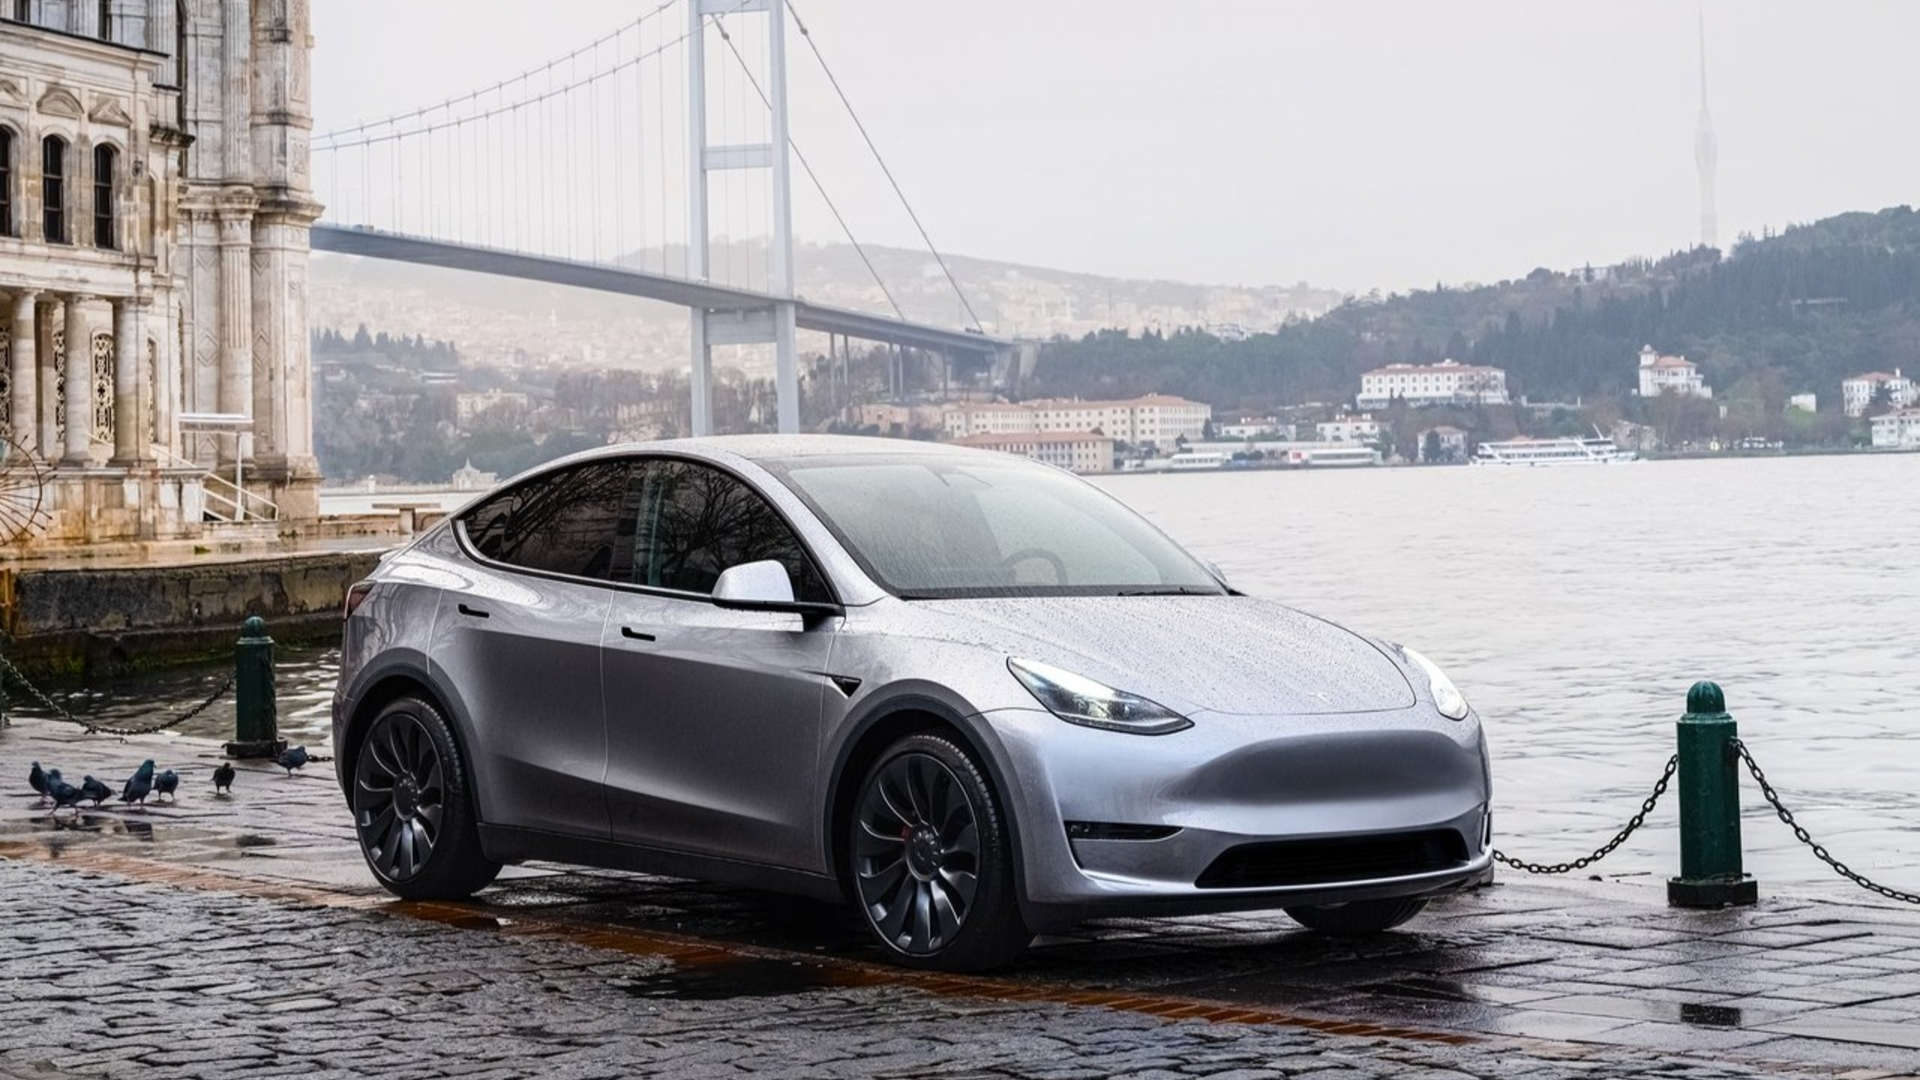 Why The Tesla Model Y Is The World's BestSelling Car